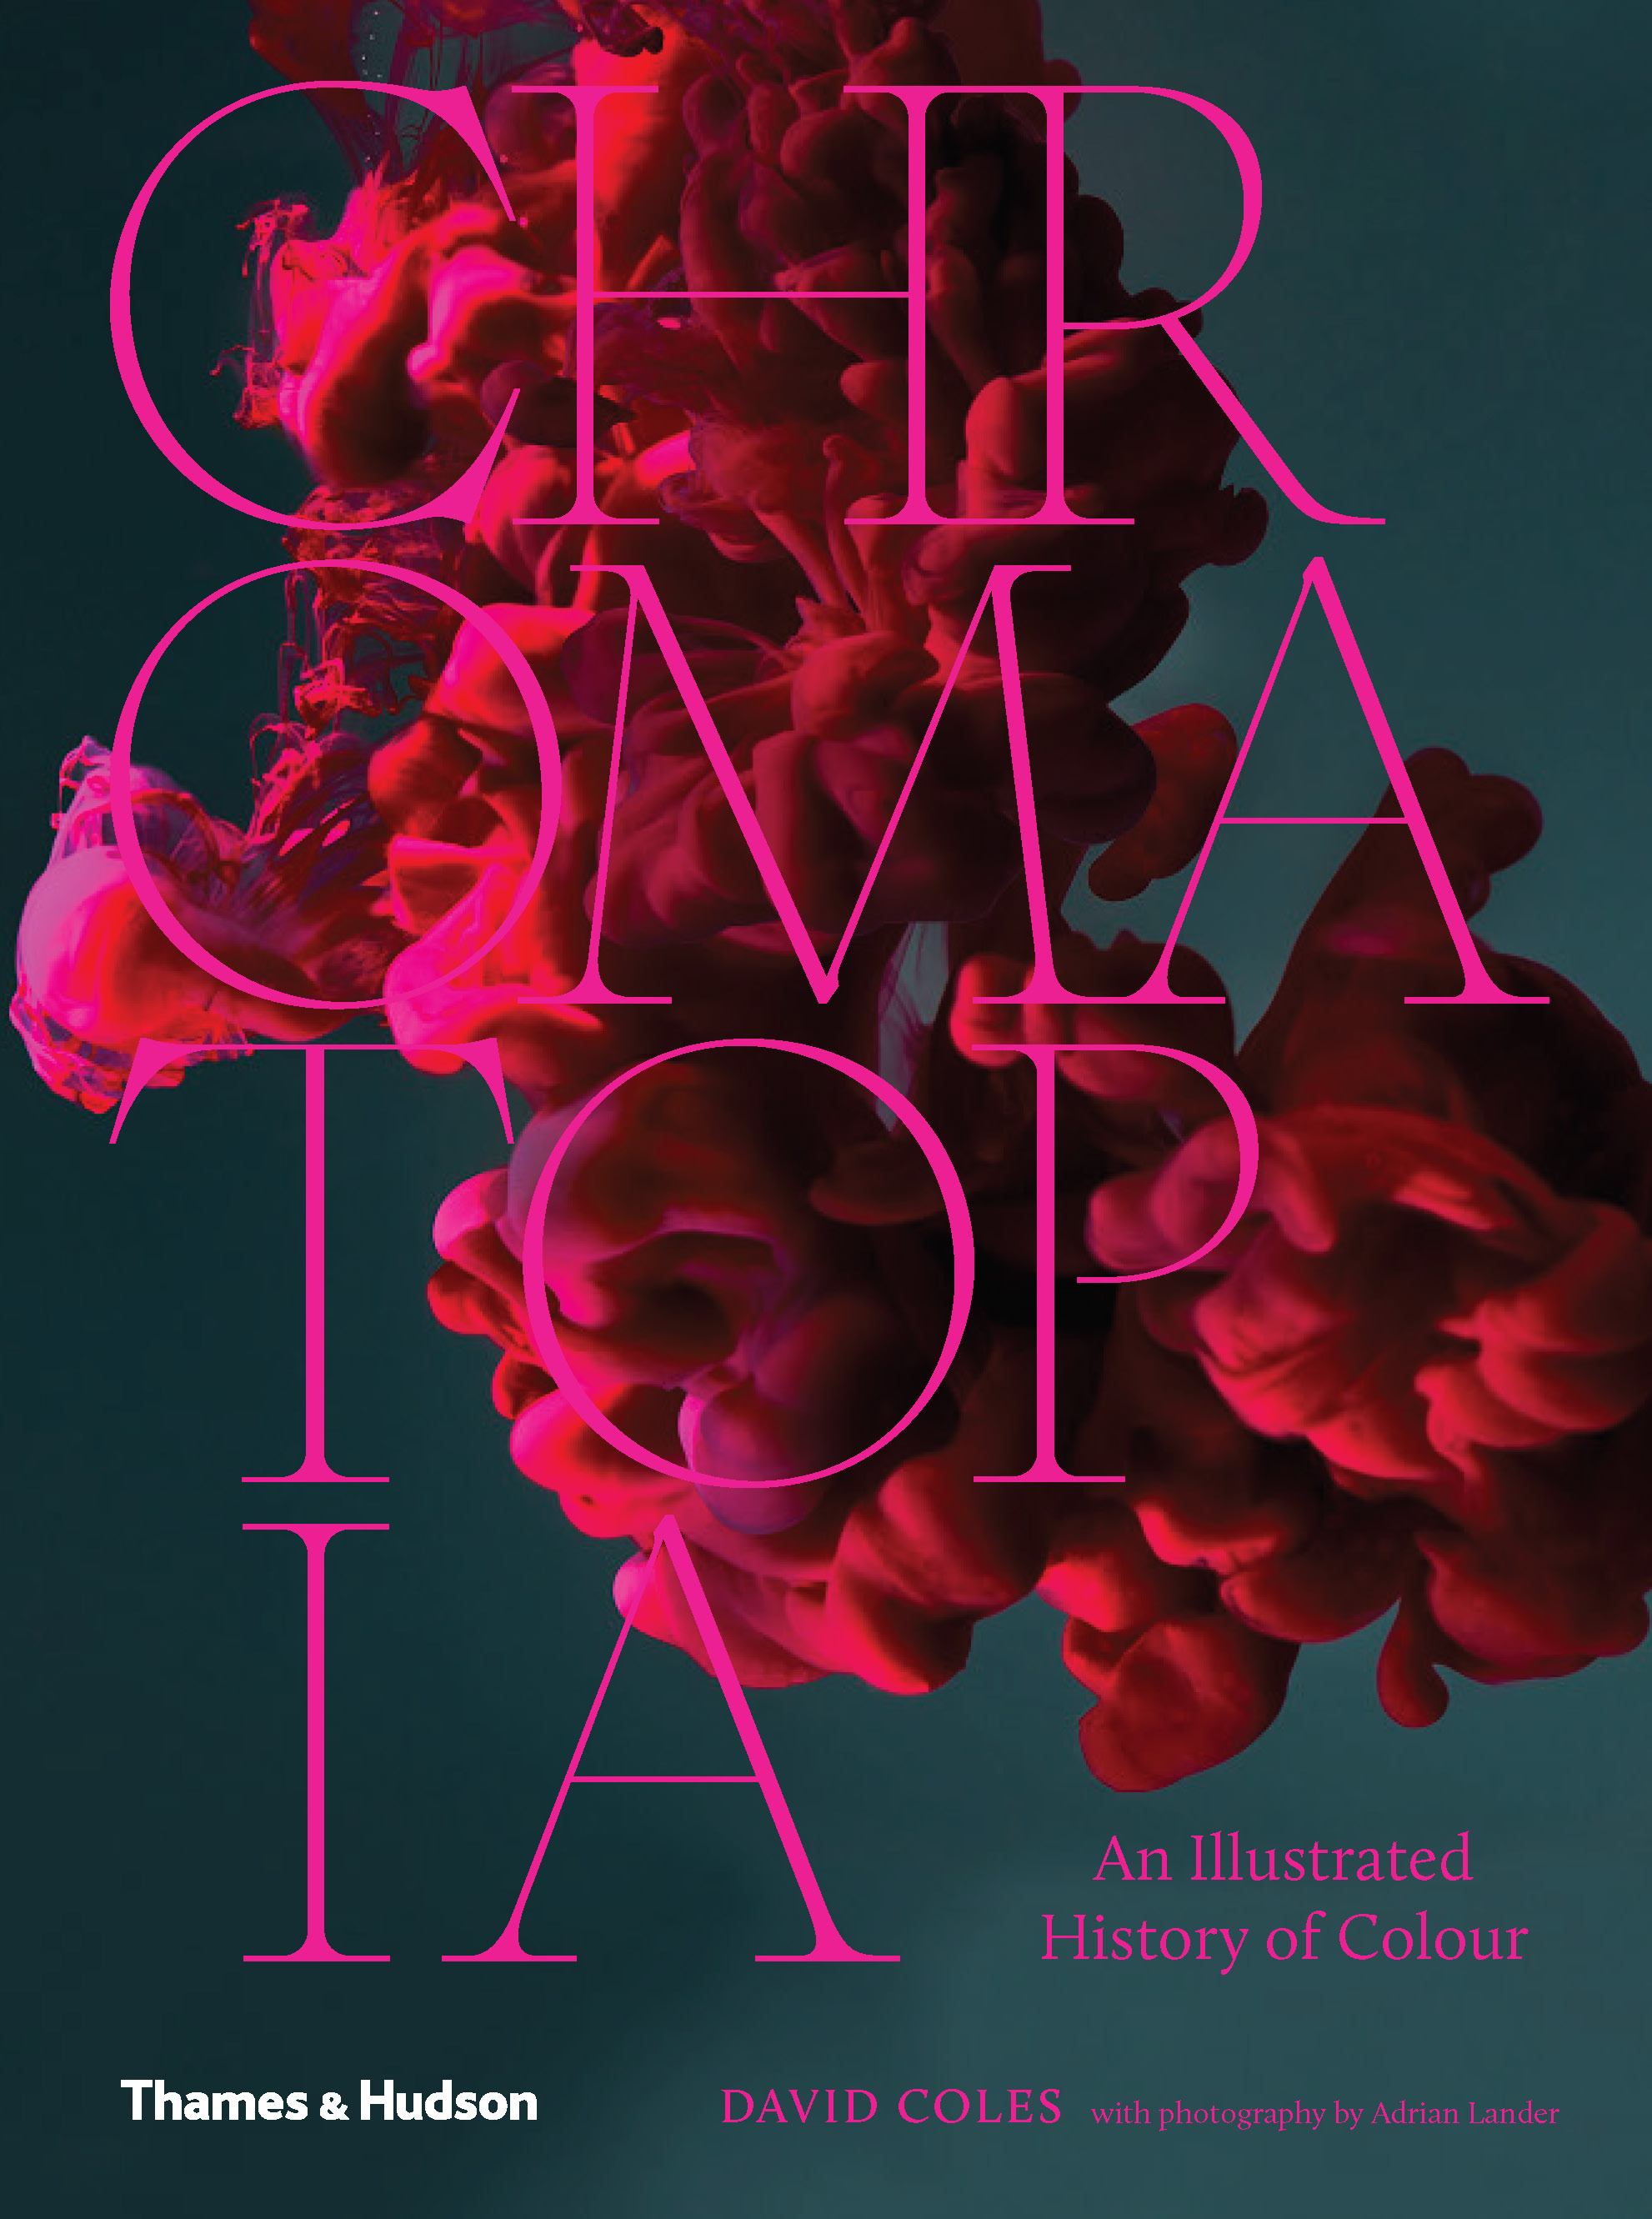 Colour image of Chromatopia: An Illustrated History of Colour book cover.